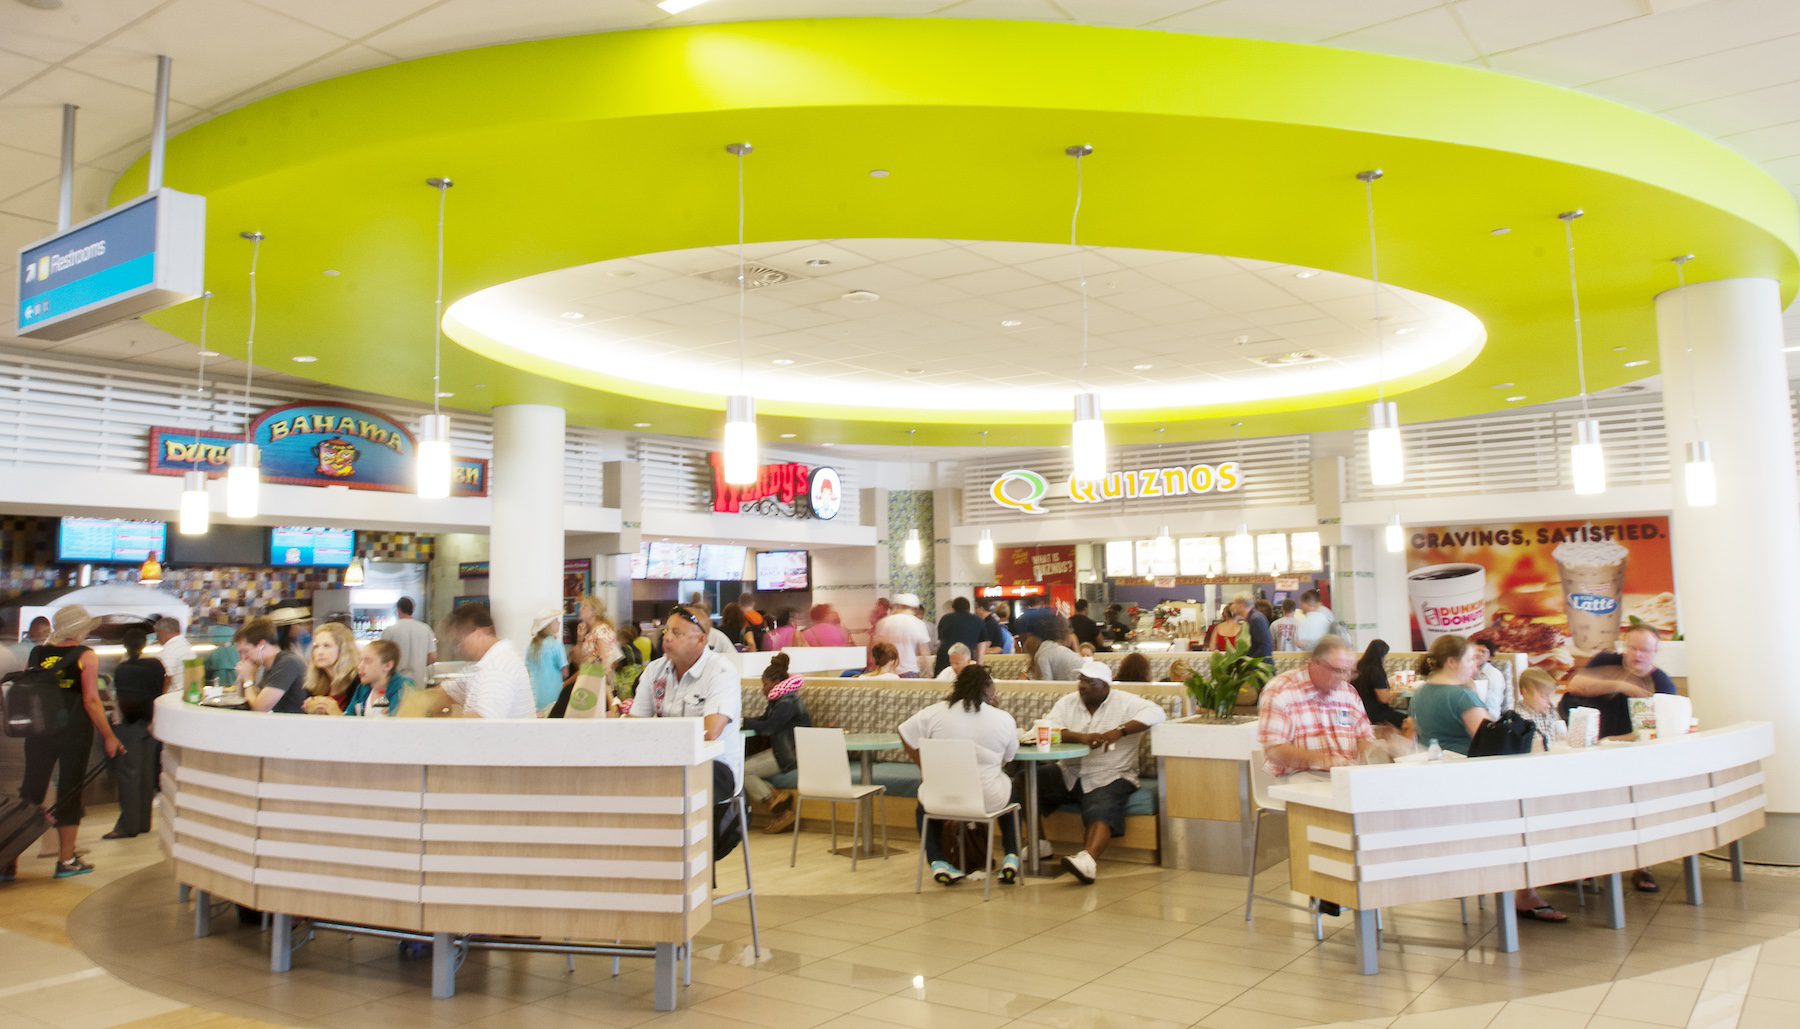 Food court with passengers enjoying meals before their flights